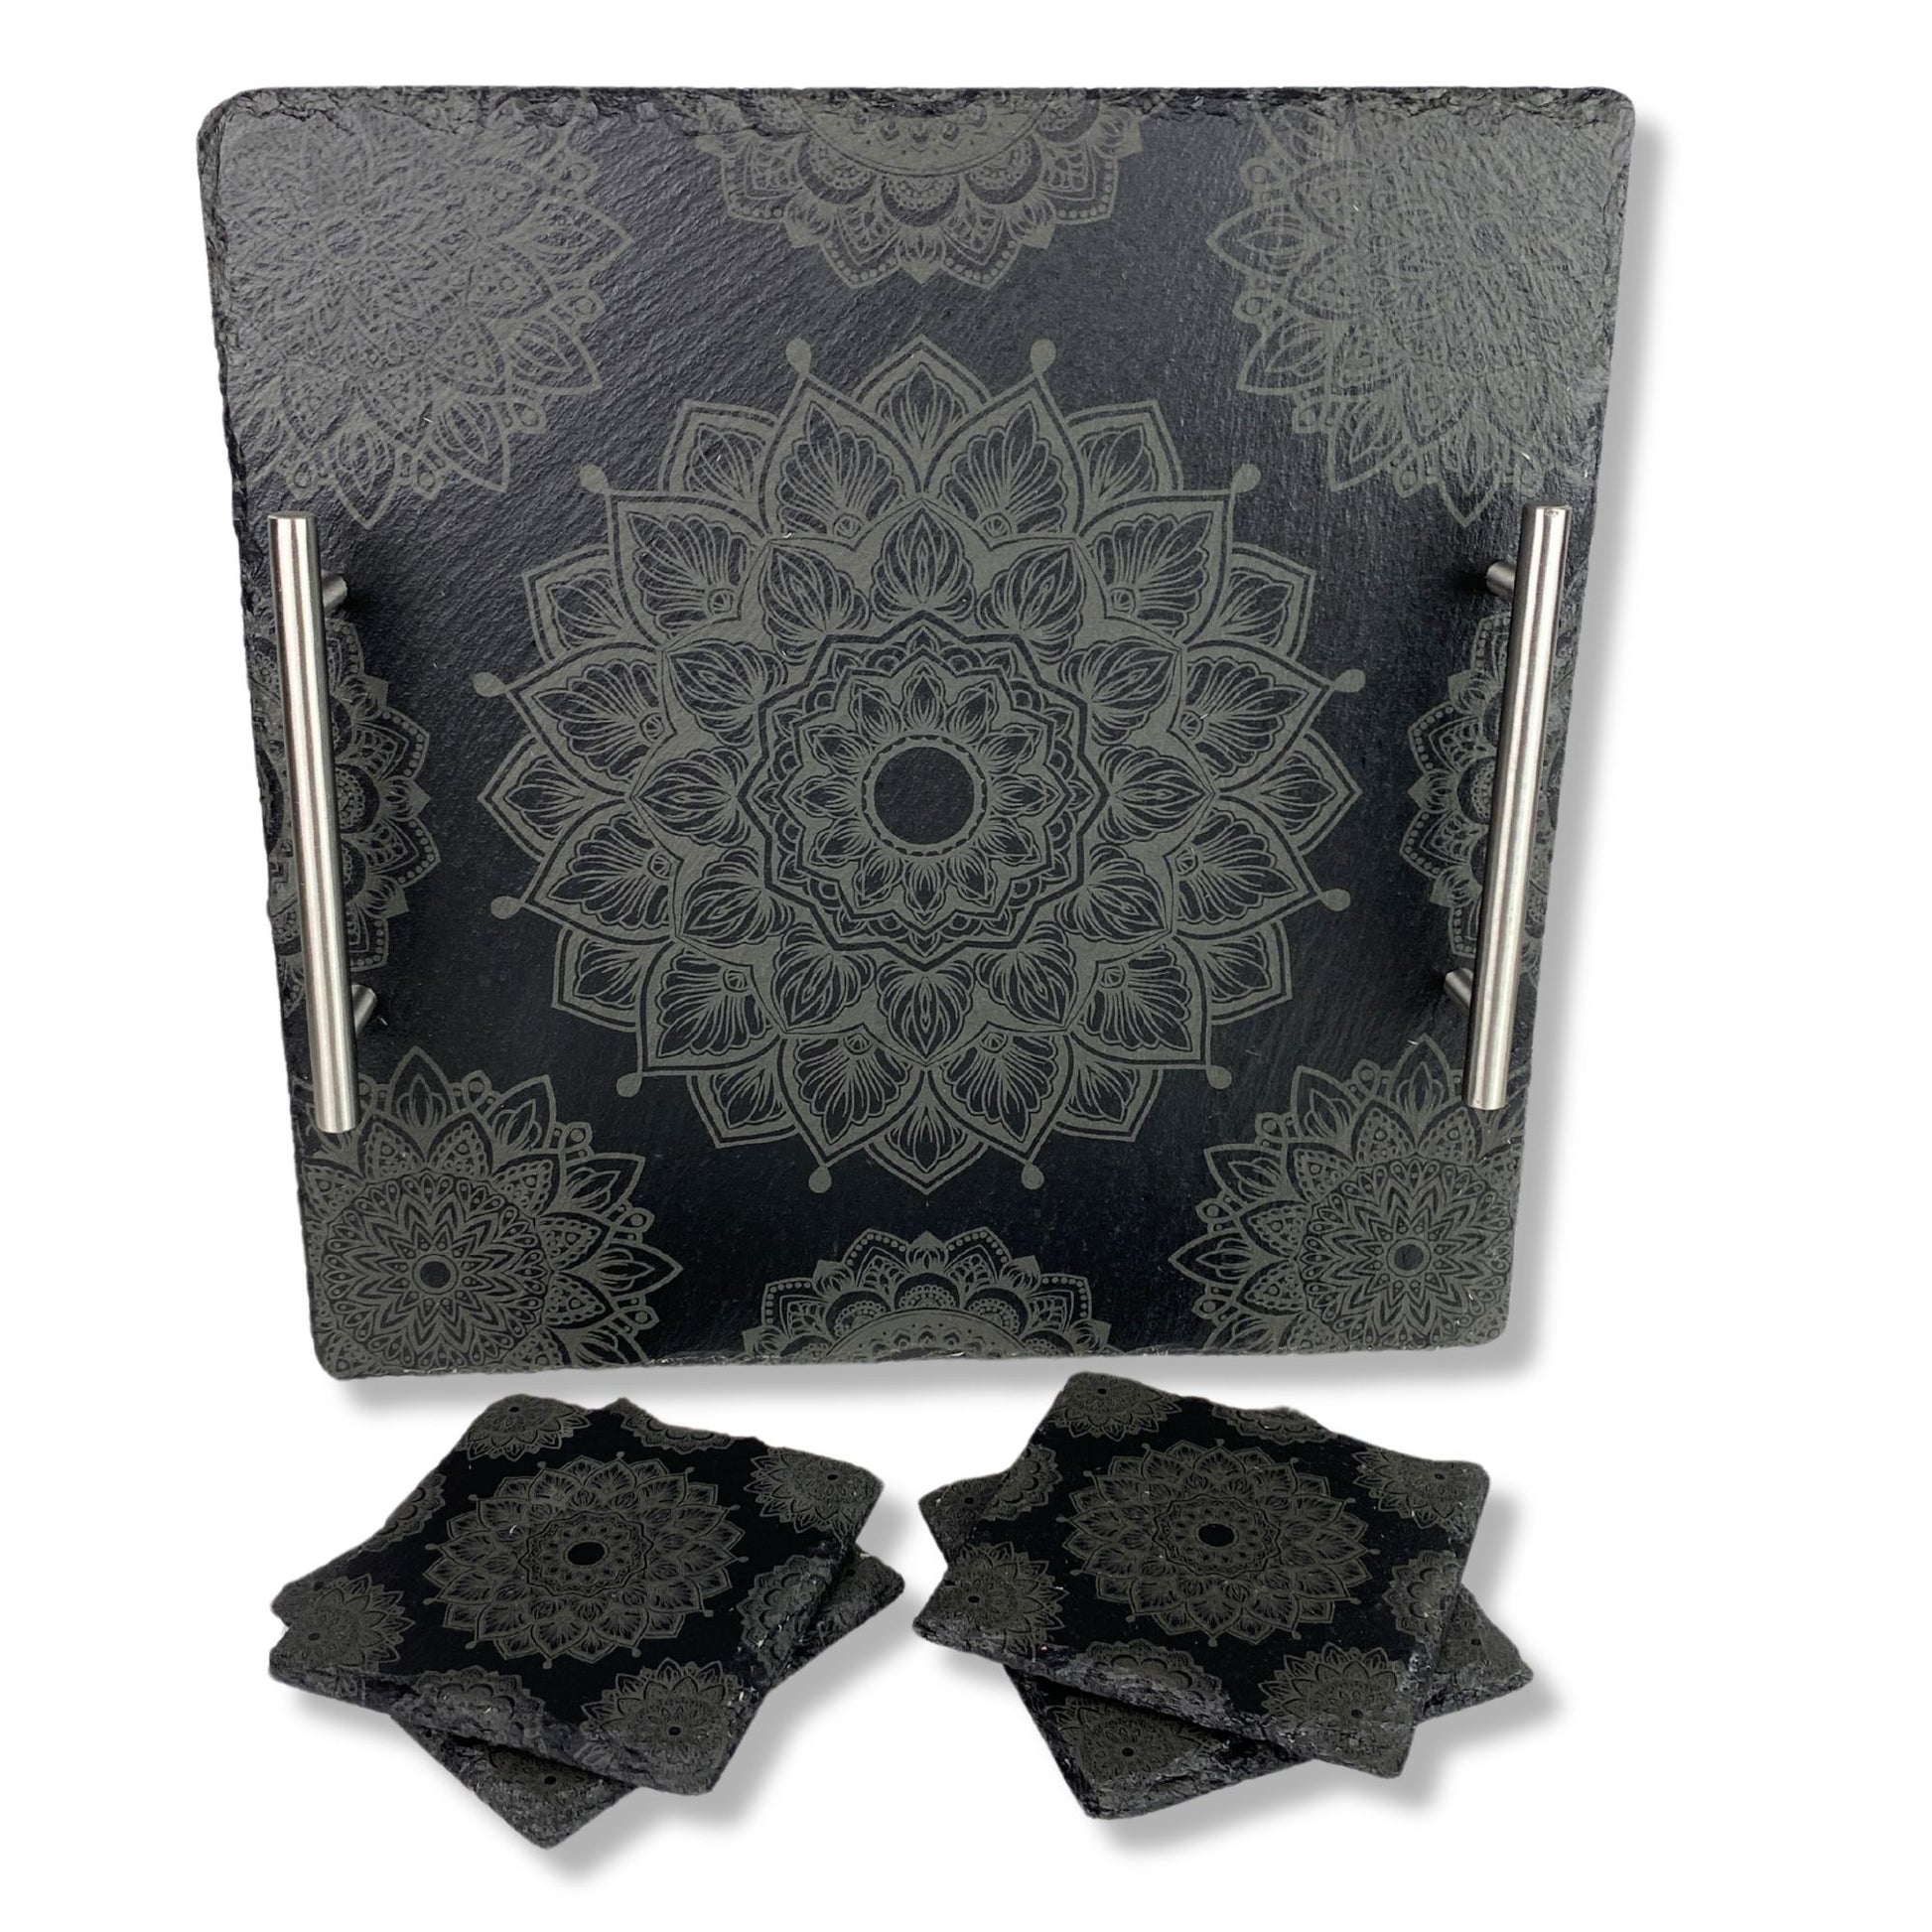 Slate Coasters Set of 4 and Serving Tray with Mandala Pattern